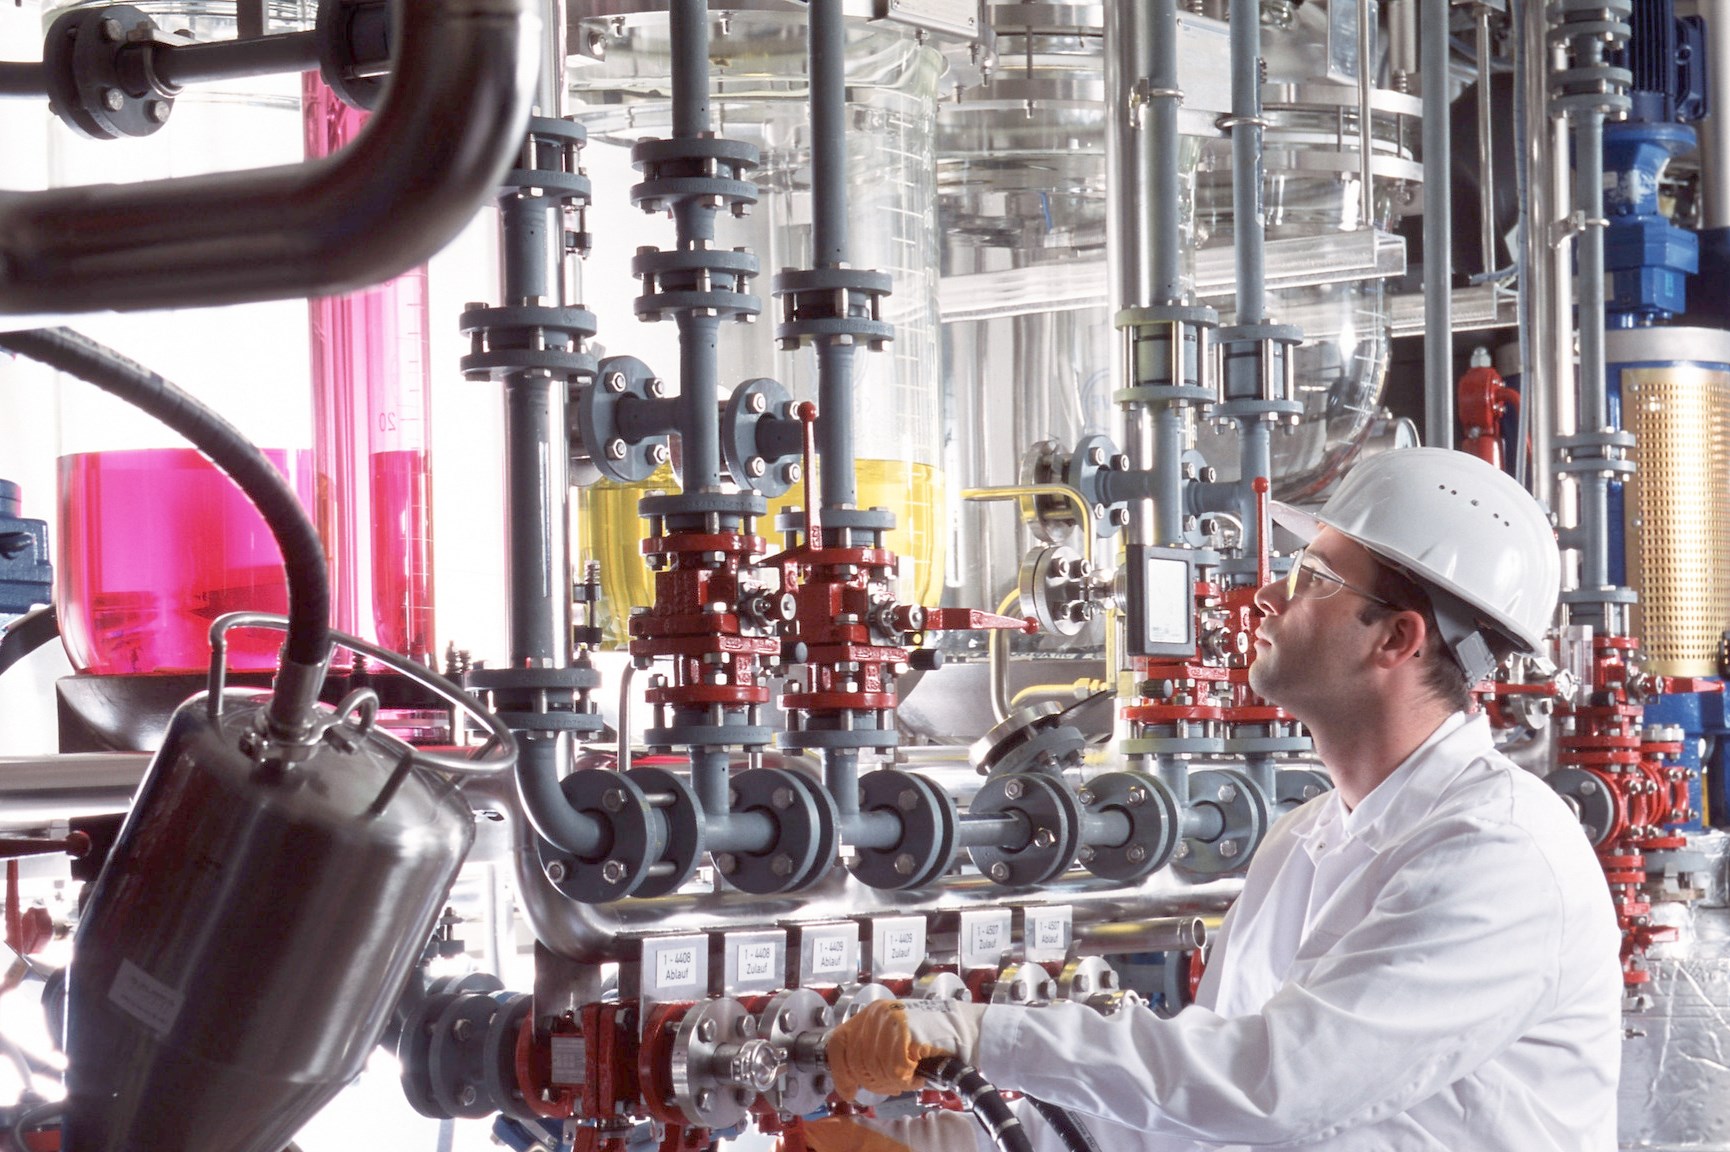 LANXESS subsidiary Saltigo produces among others active ingredients for the pharmaceutical and agro industry.